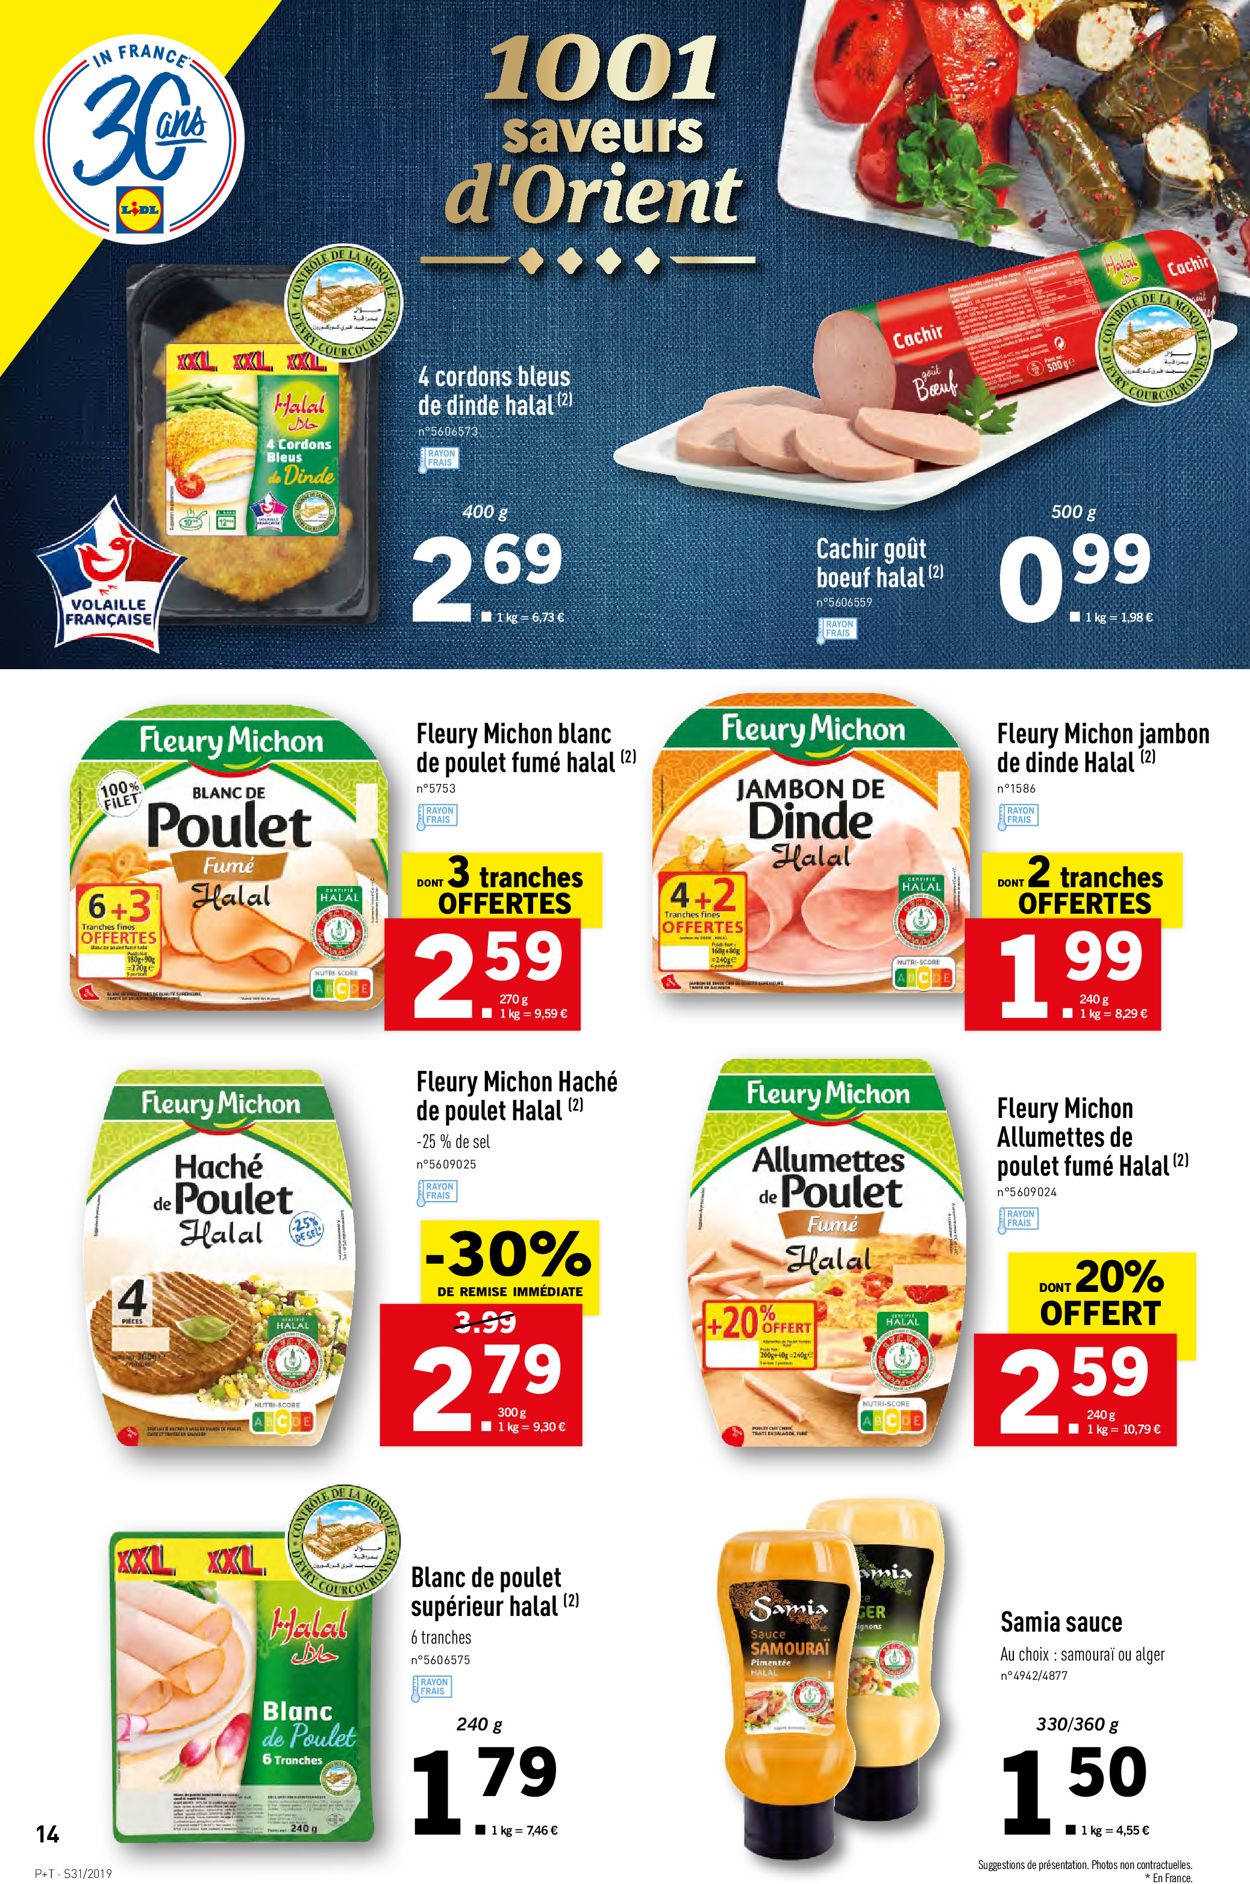 Lidl Catalogue - 31.07-06.08.2019 (Page 14)